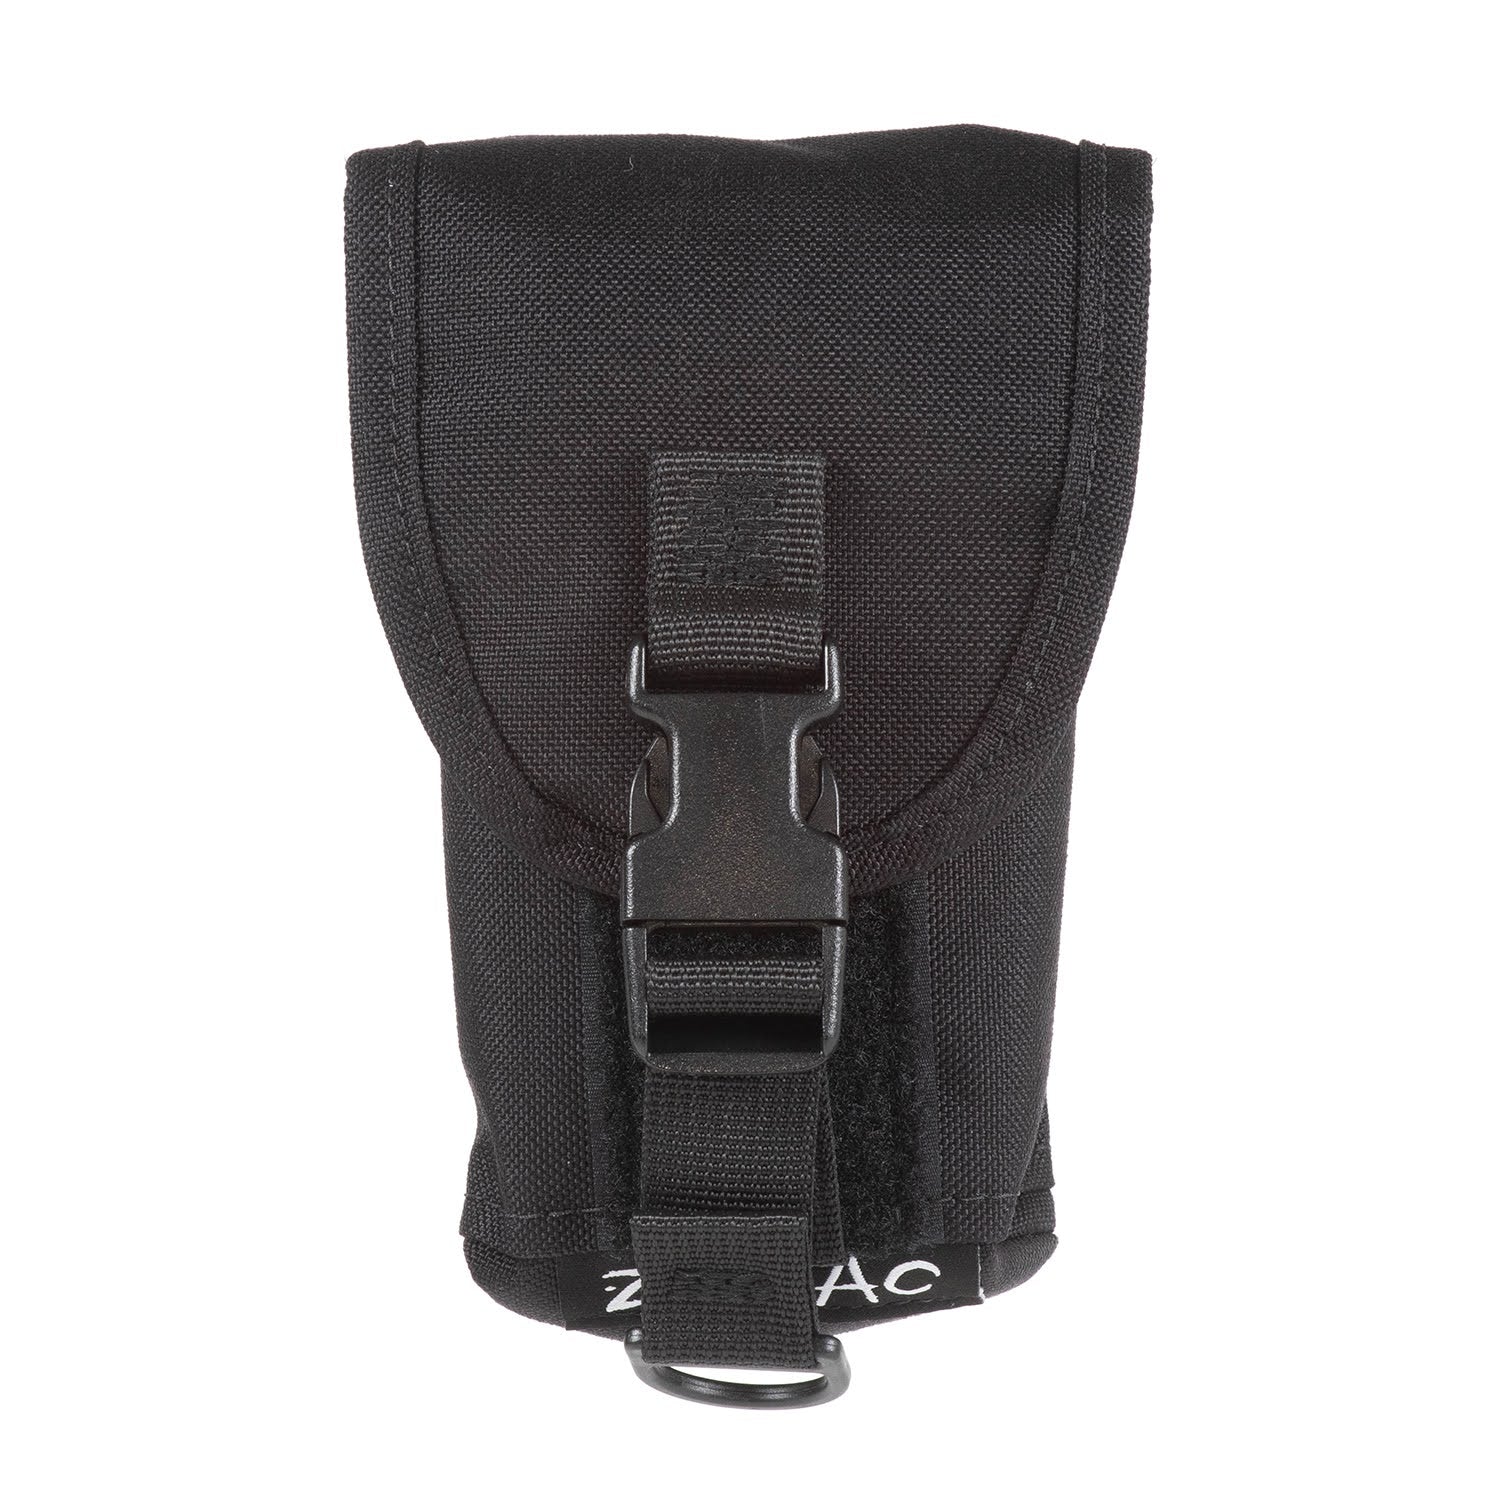 ZODIAC BAGGAGE Cell Phone Holster